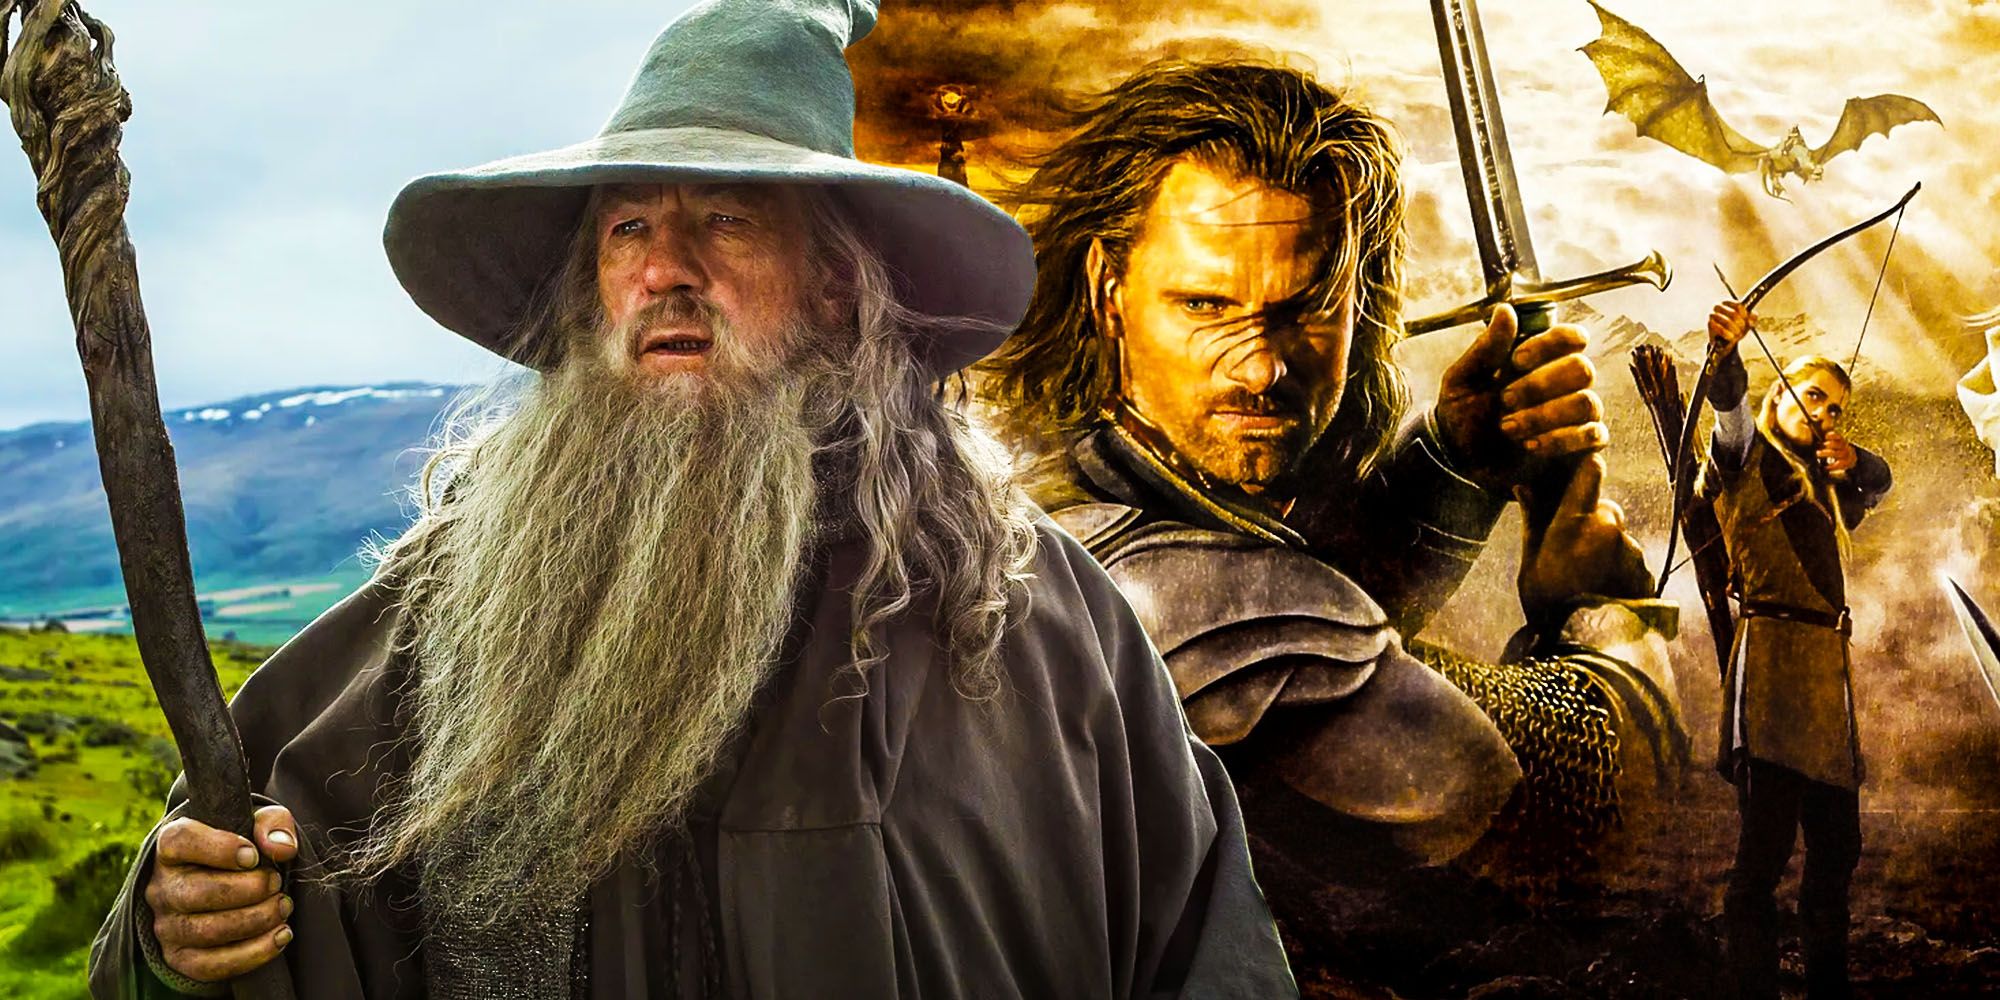 Lord of the rings never Showed How Powerful Gandalf Really Is